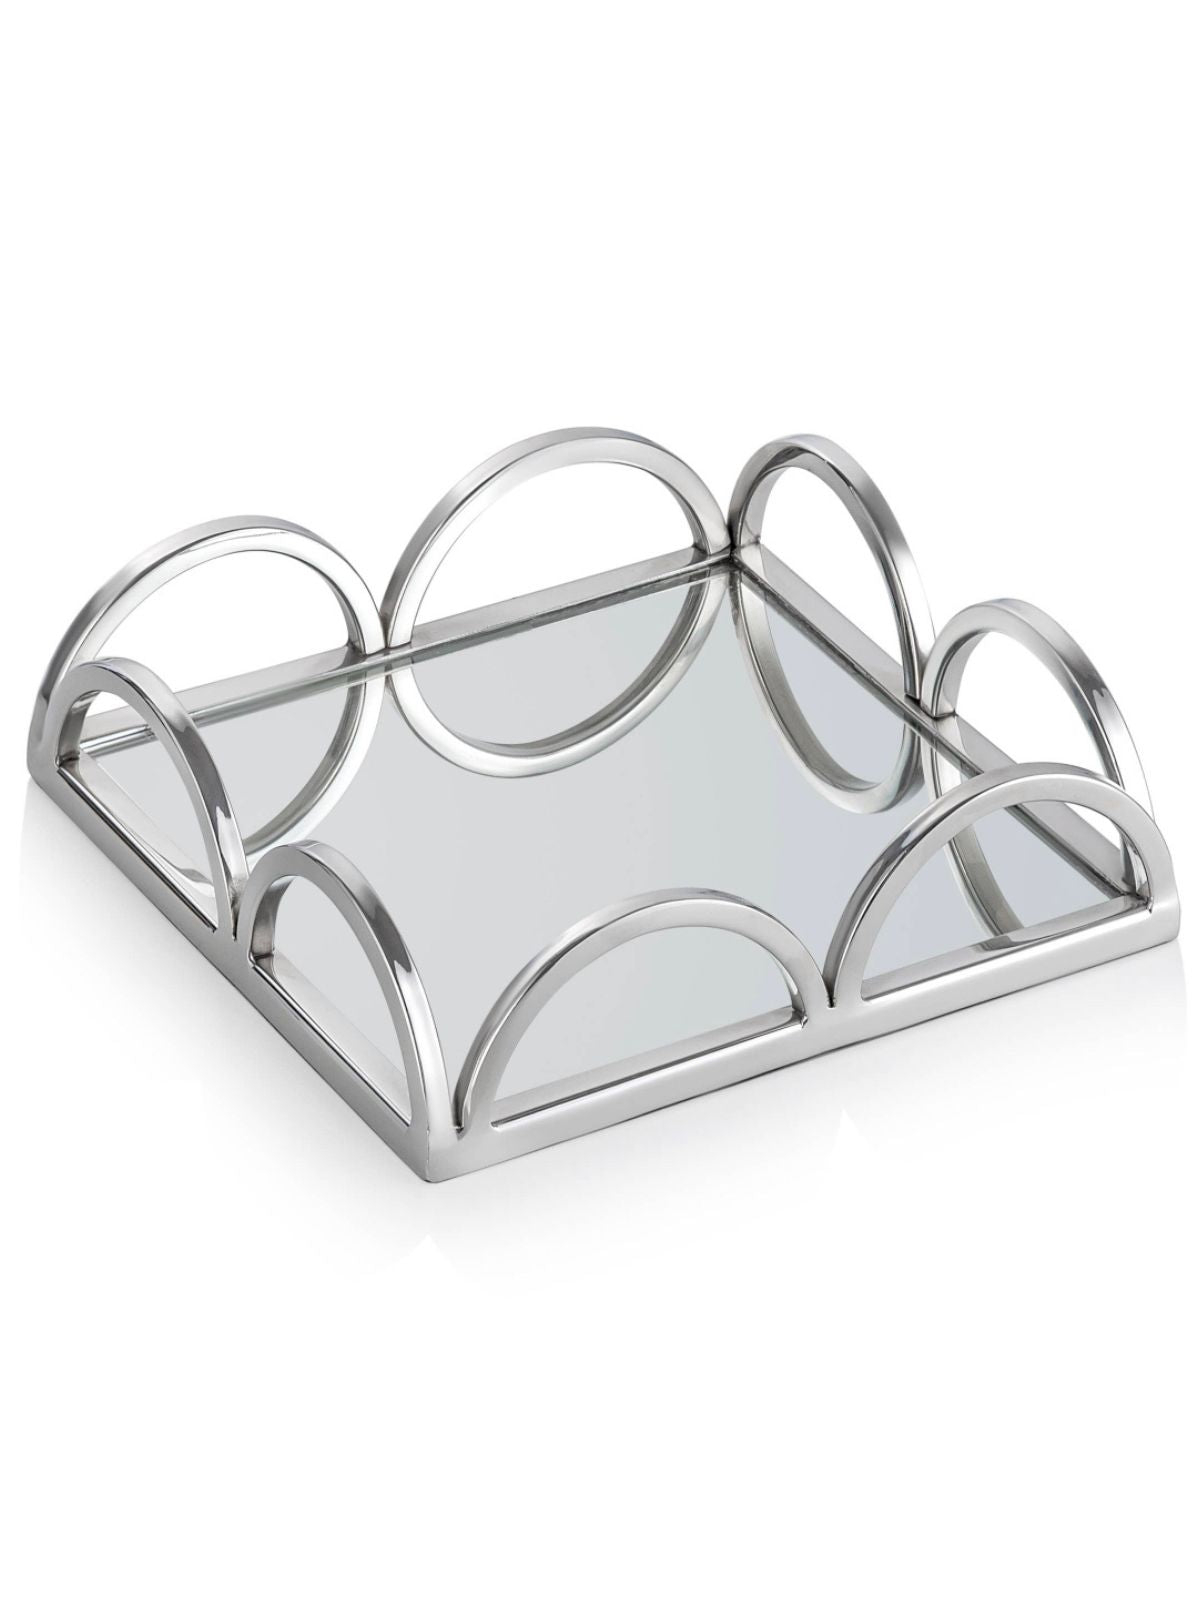 8 inch Squared Mirror Napkin Holder with Chrome Loop Bars sold by KYA Home Decor.